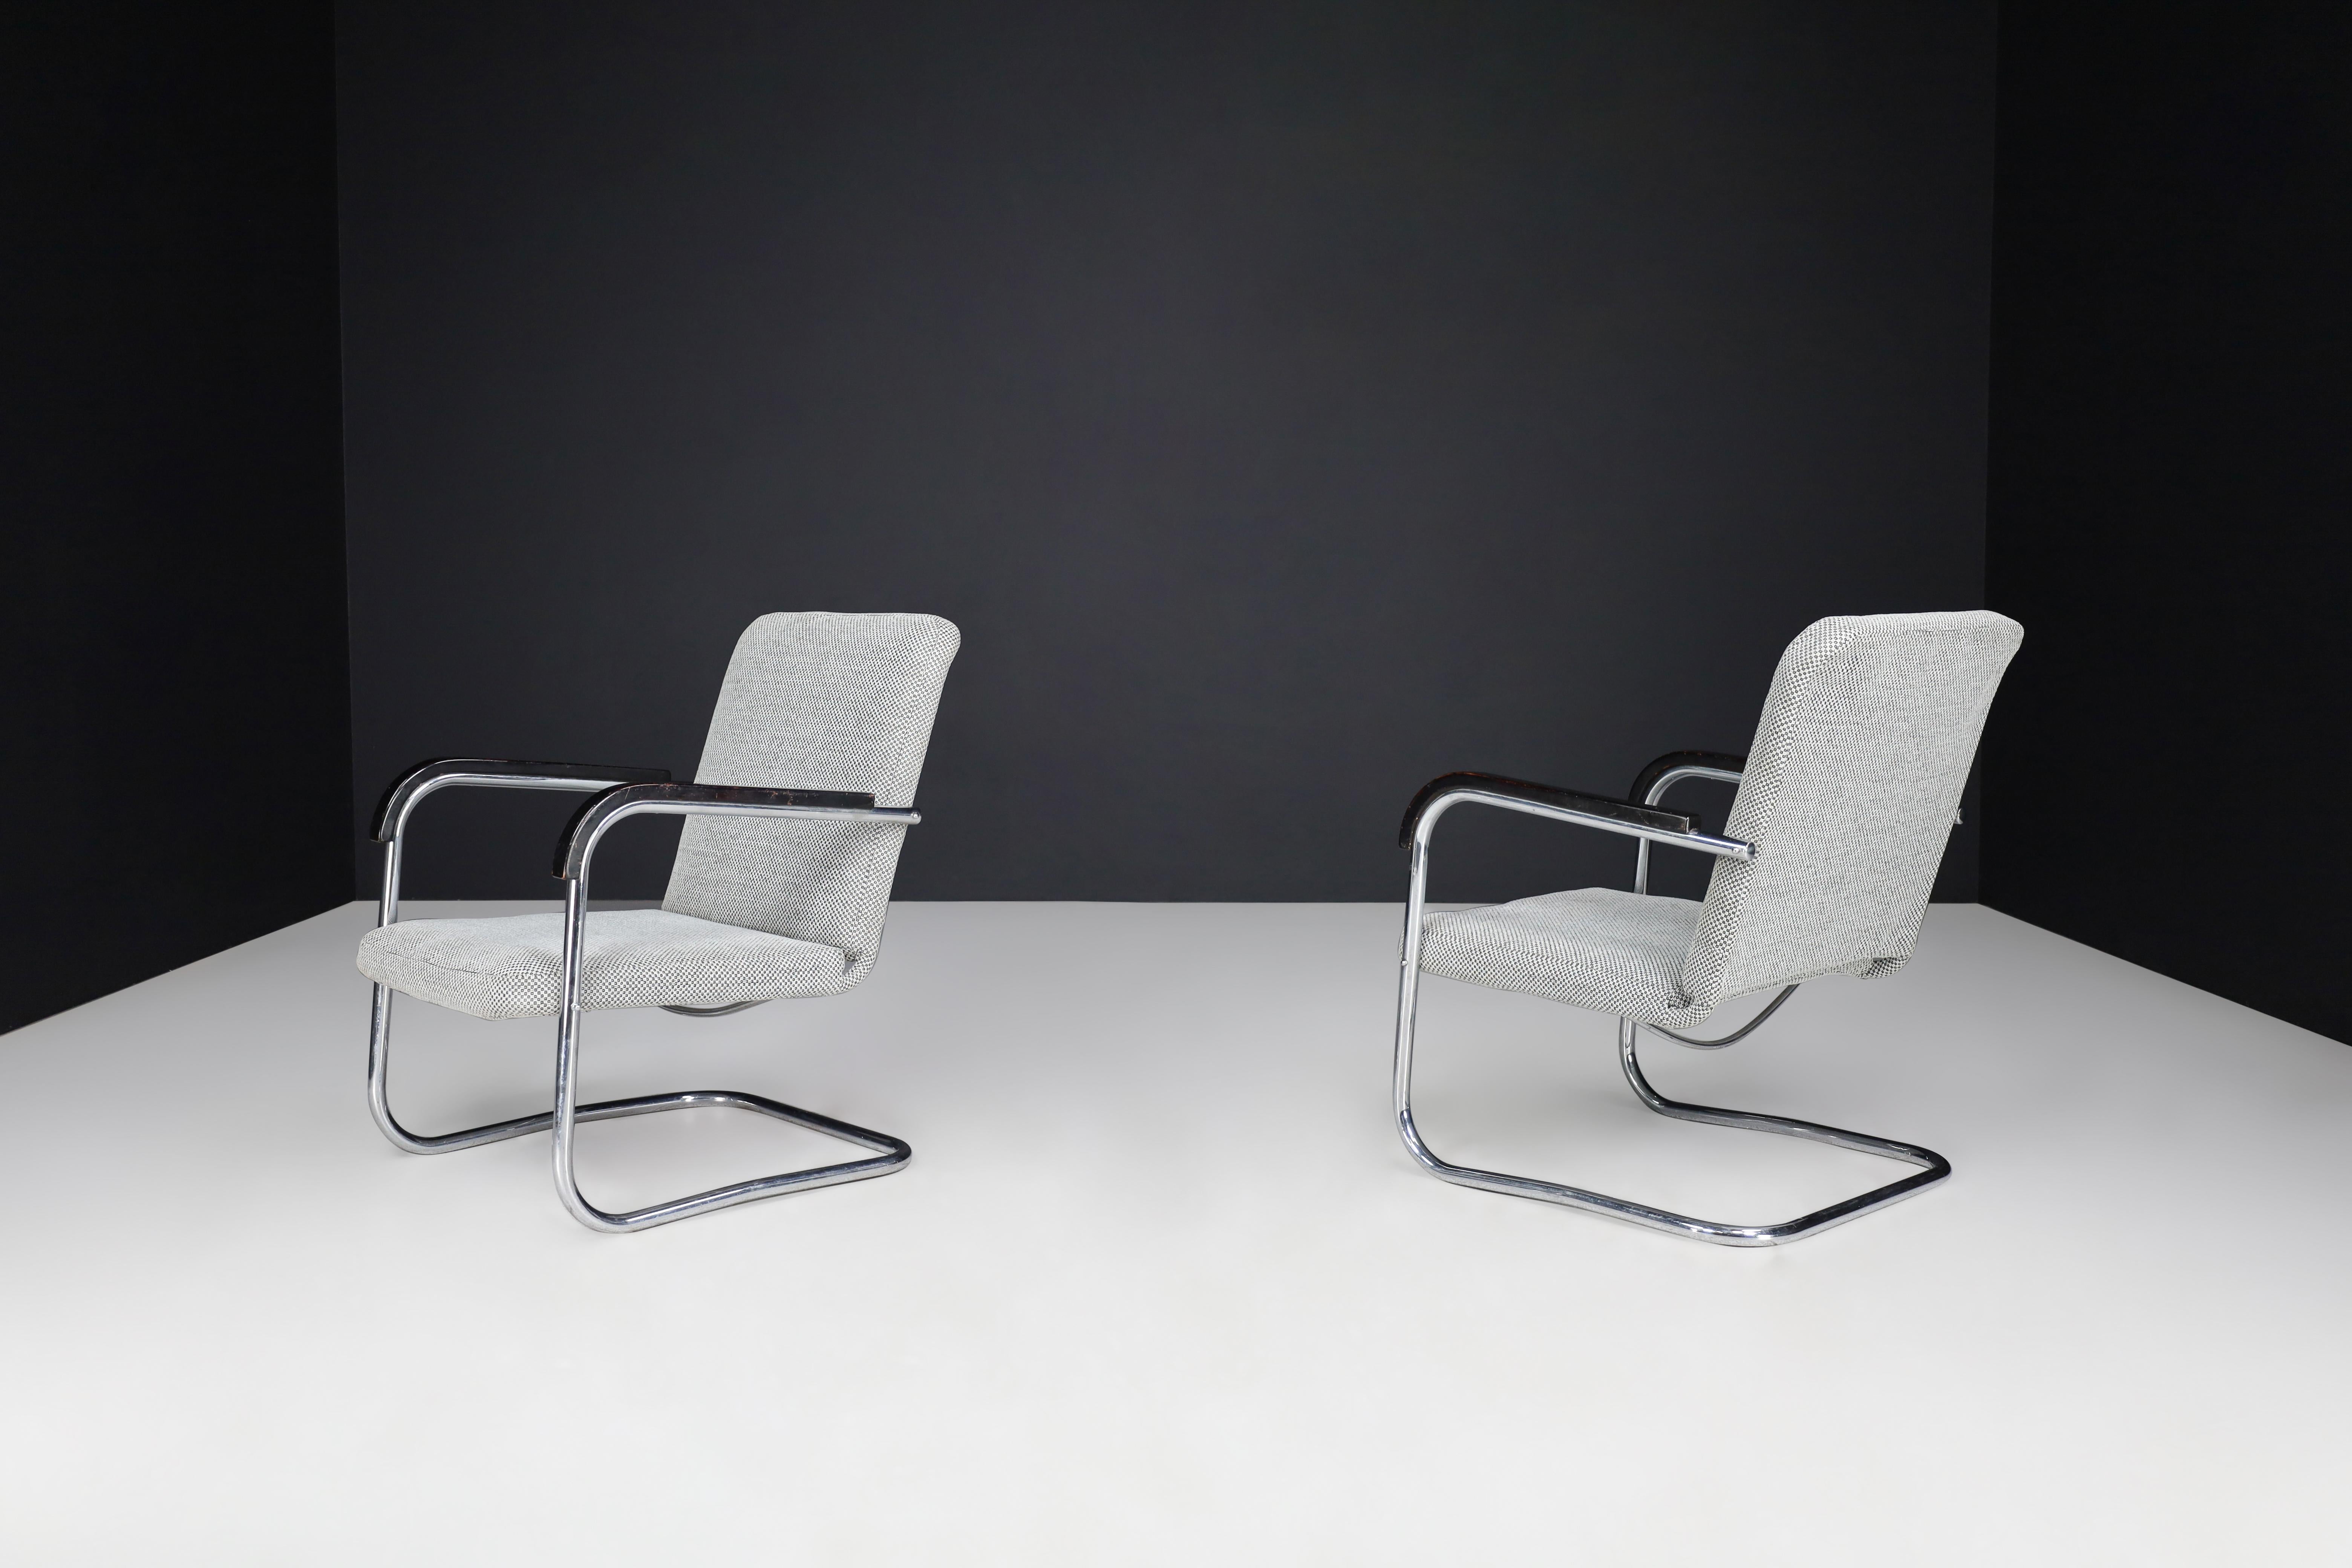 Fabric Thonet Chrome Steel Cantilever Armchairs 1930s Midcentury Bauhaus period. For Sale